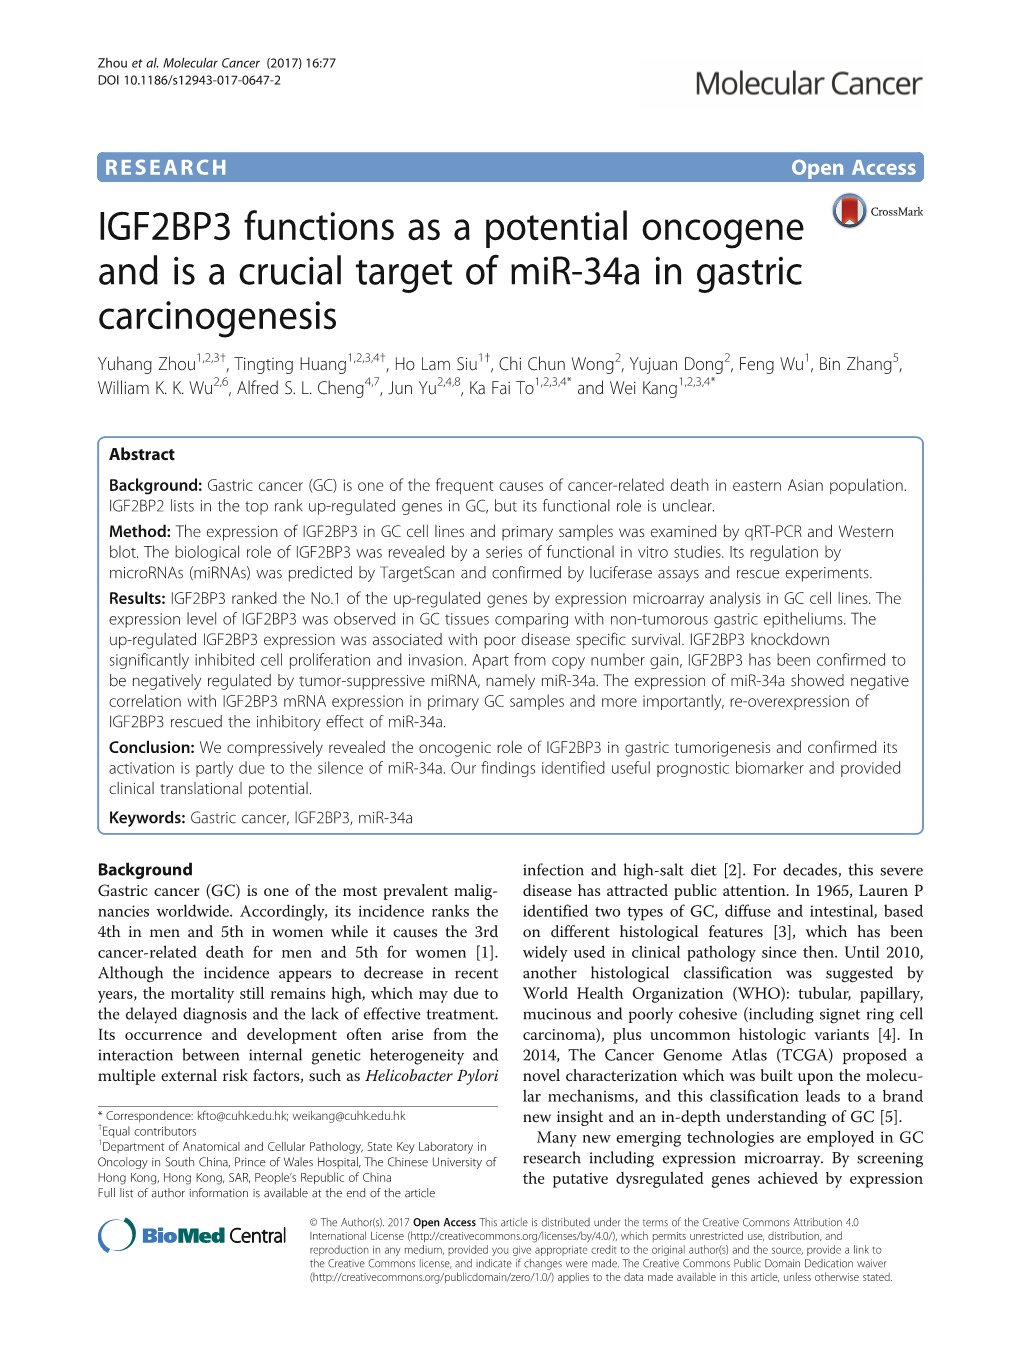 IGF2BP3 Functions As a Potential Oncogene and Is a Crucial Target of Mir-34A in Gastric Carcinogenesis